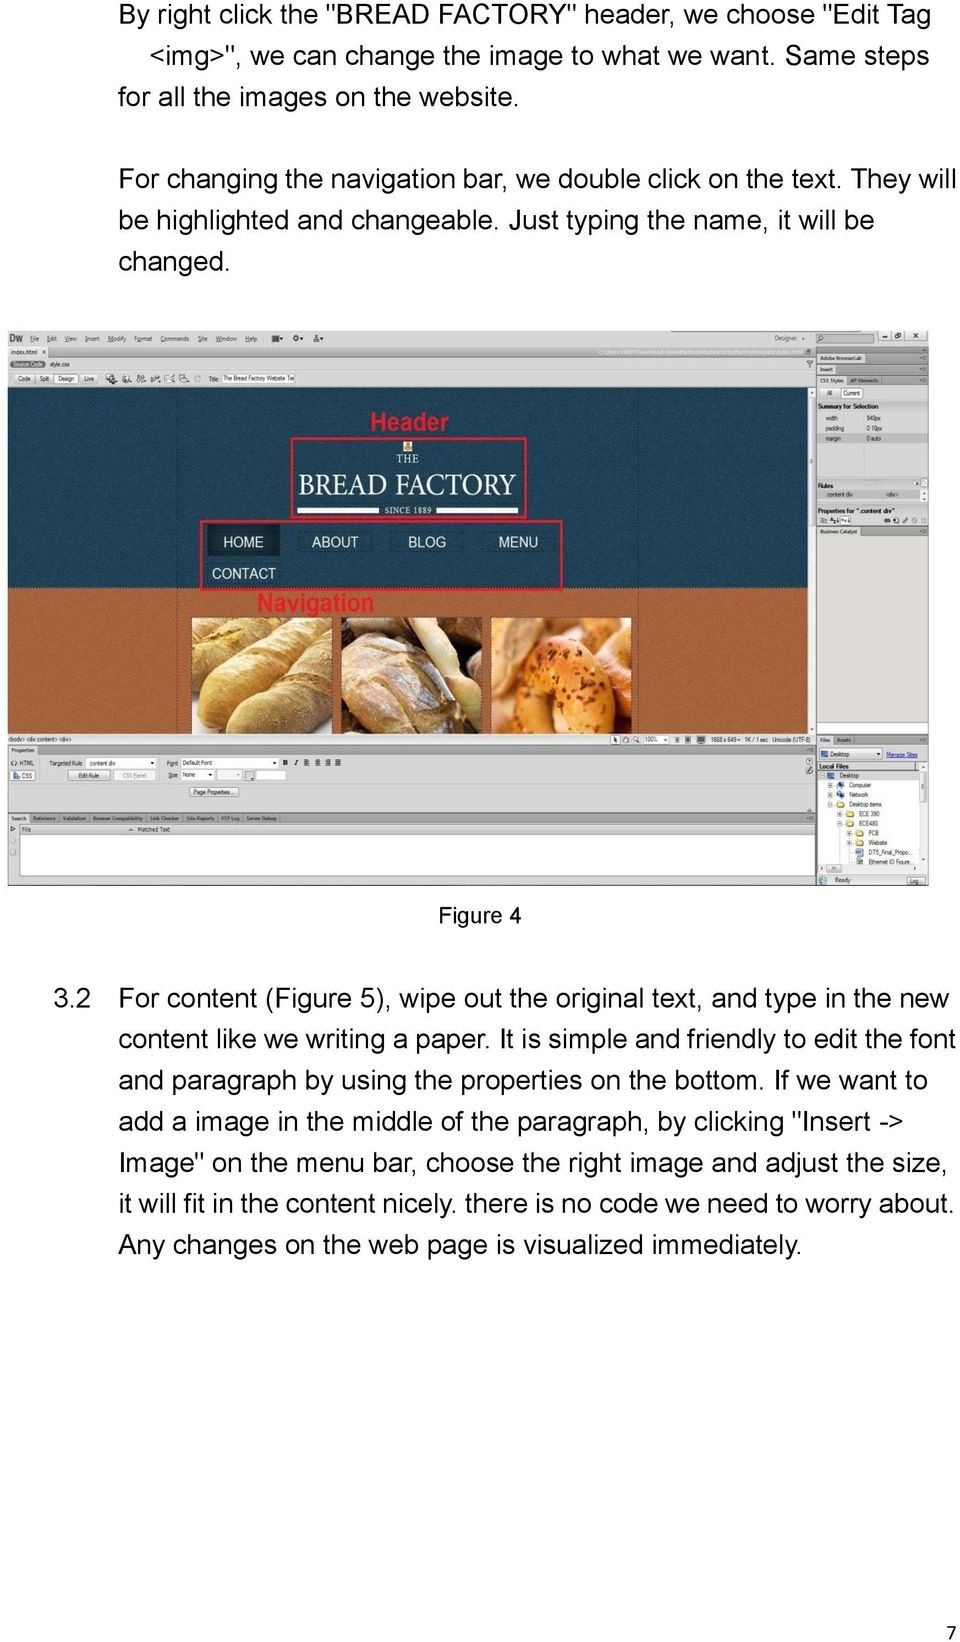 2 For content (Figure 5), wipe out the original text, and type in the new content like we writing a paper.